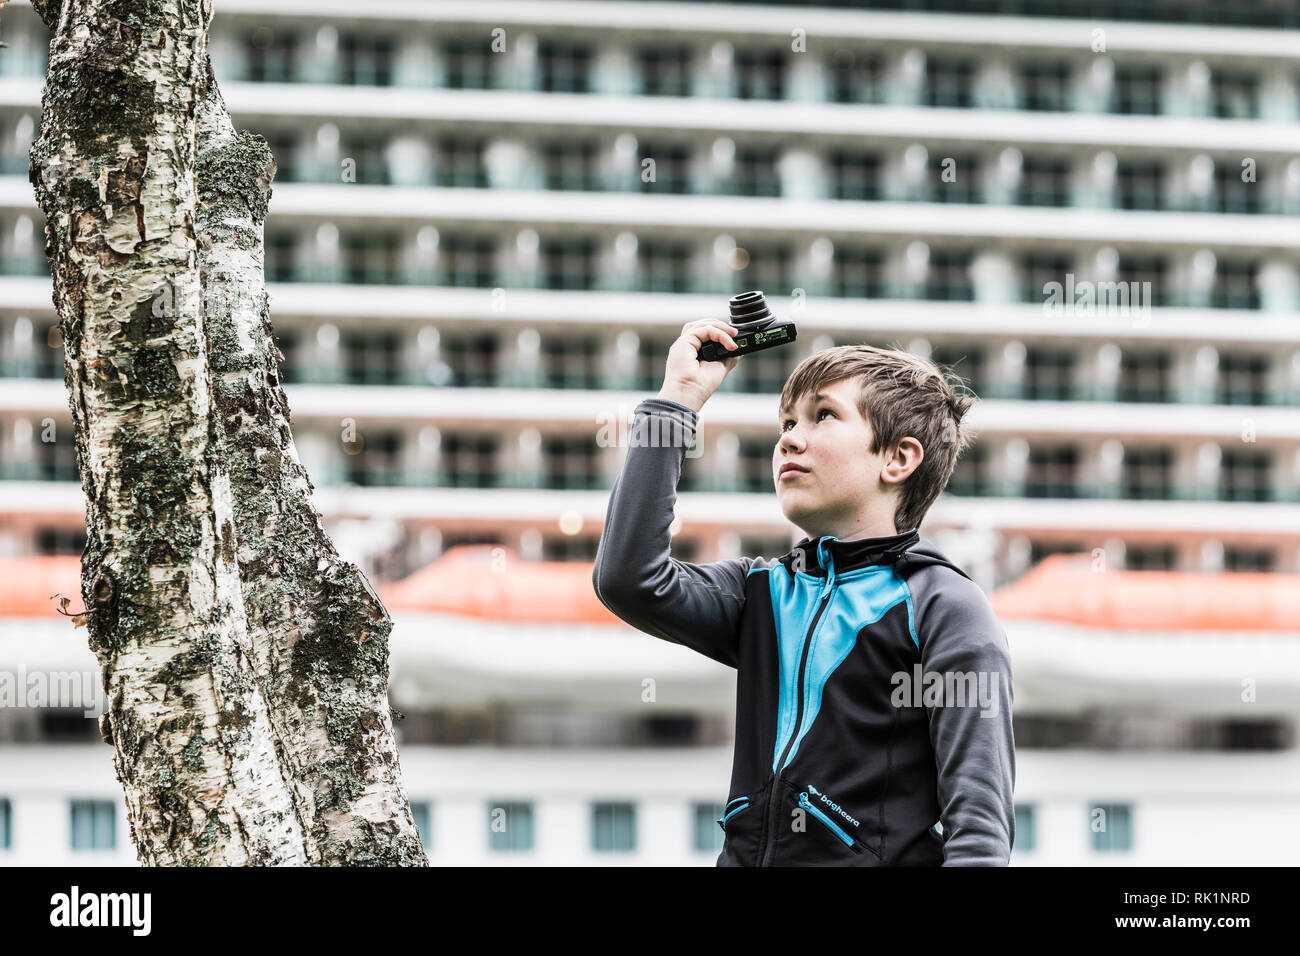 Portrait of young boy pointing camera upwards by tree Stock Photo